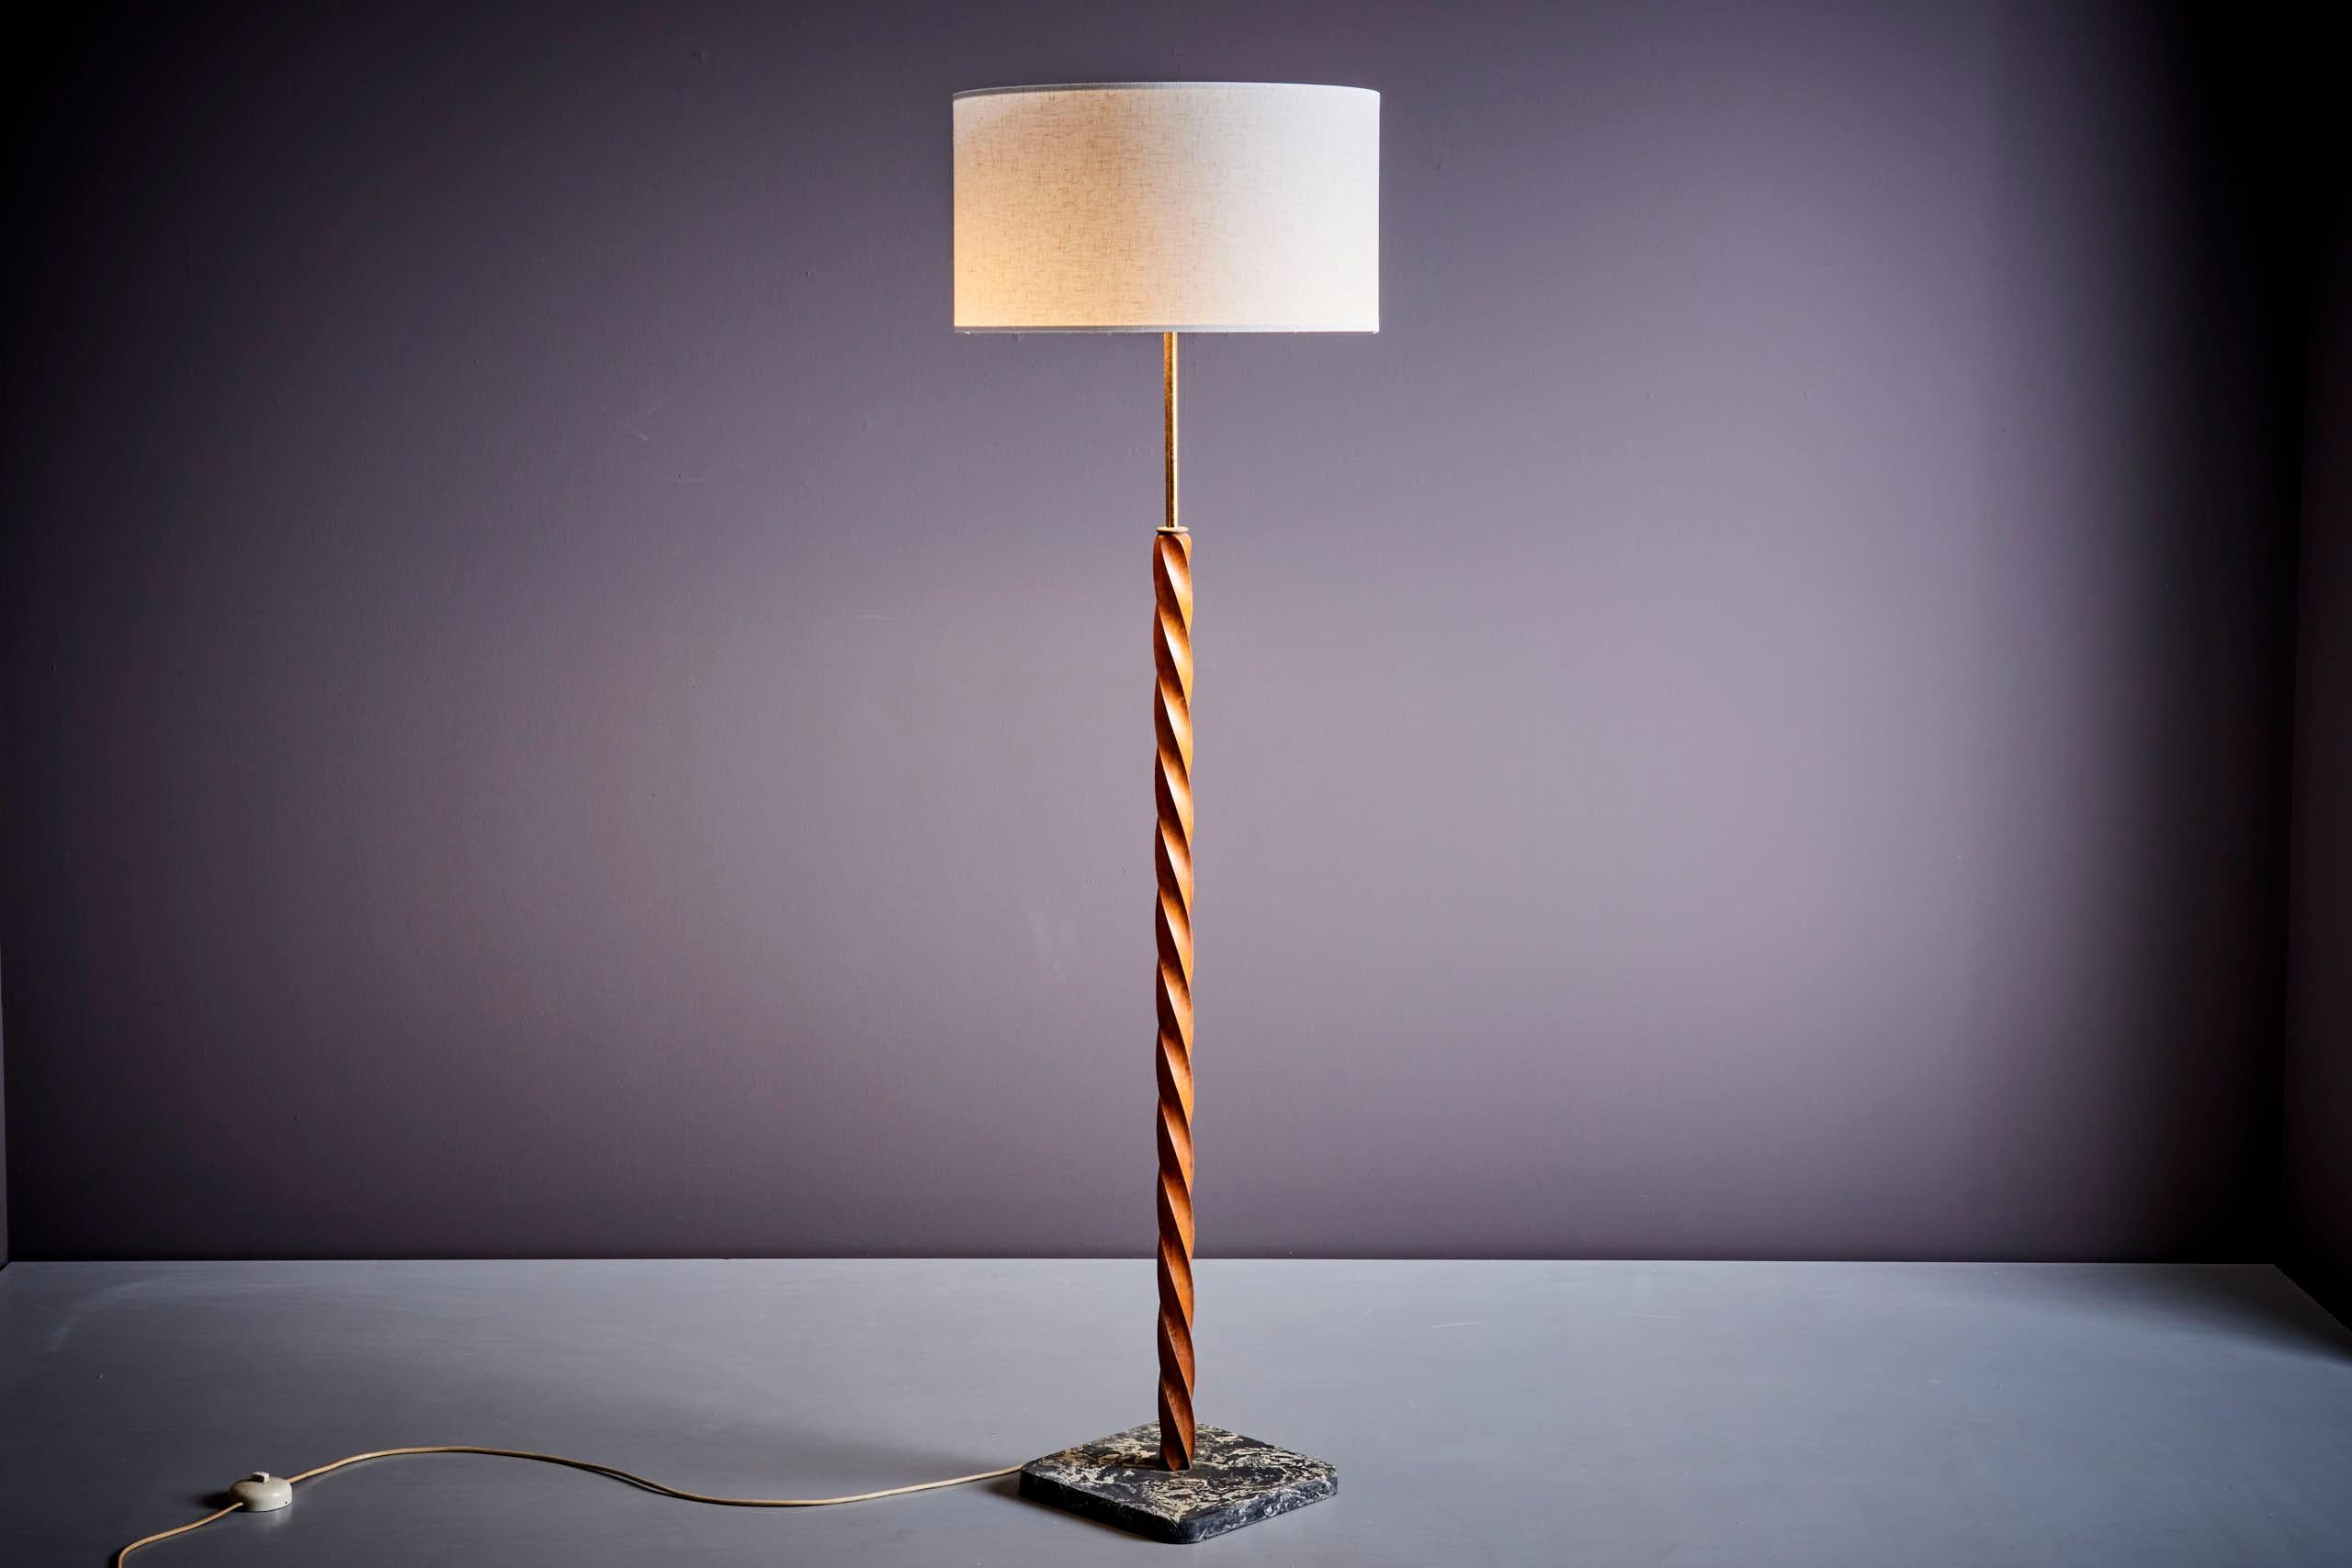 Floor Lamp, France 1940s. The measurements given apply to the lamp base without the shade. 
The base is like a concrete material. Some nice brass details and the mahogany wood just looks fantastic.
